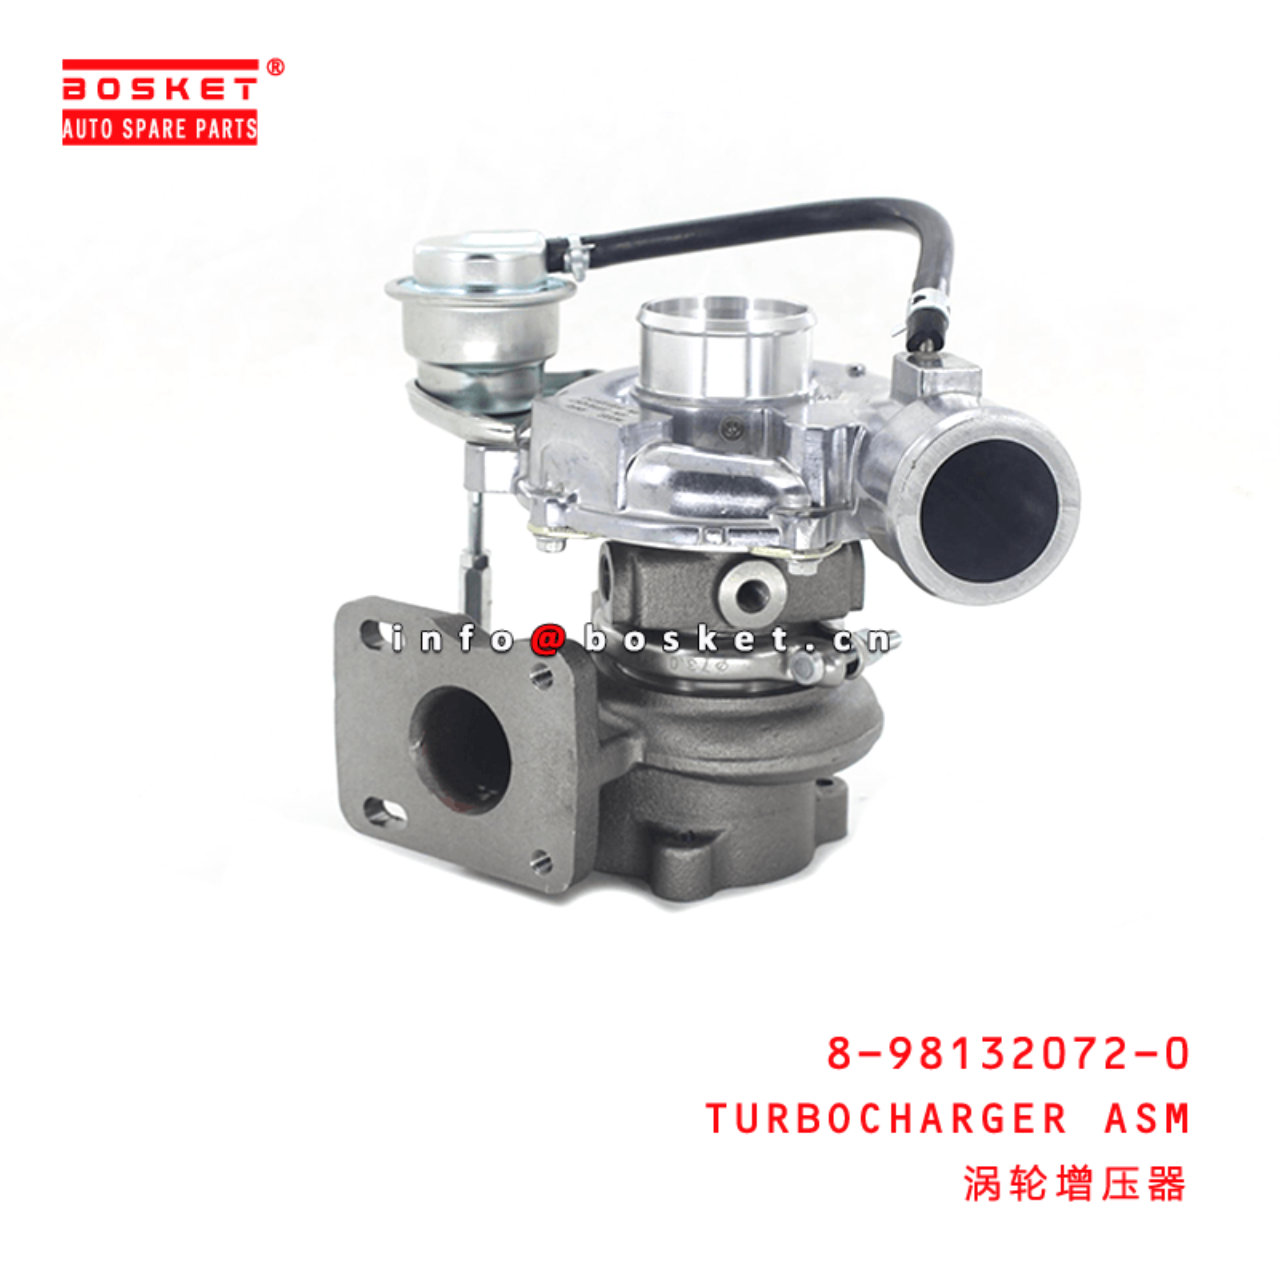  8-98132072-0 Turbocharger Assembly 8981320720 Suitable for ISUZU TFR